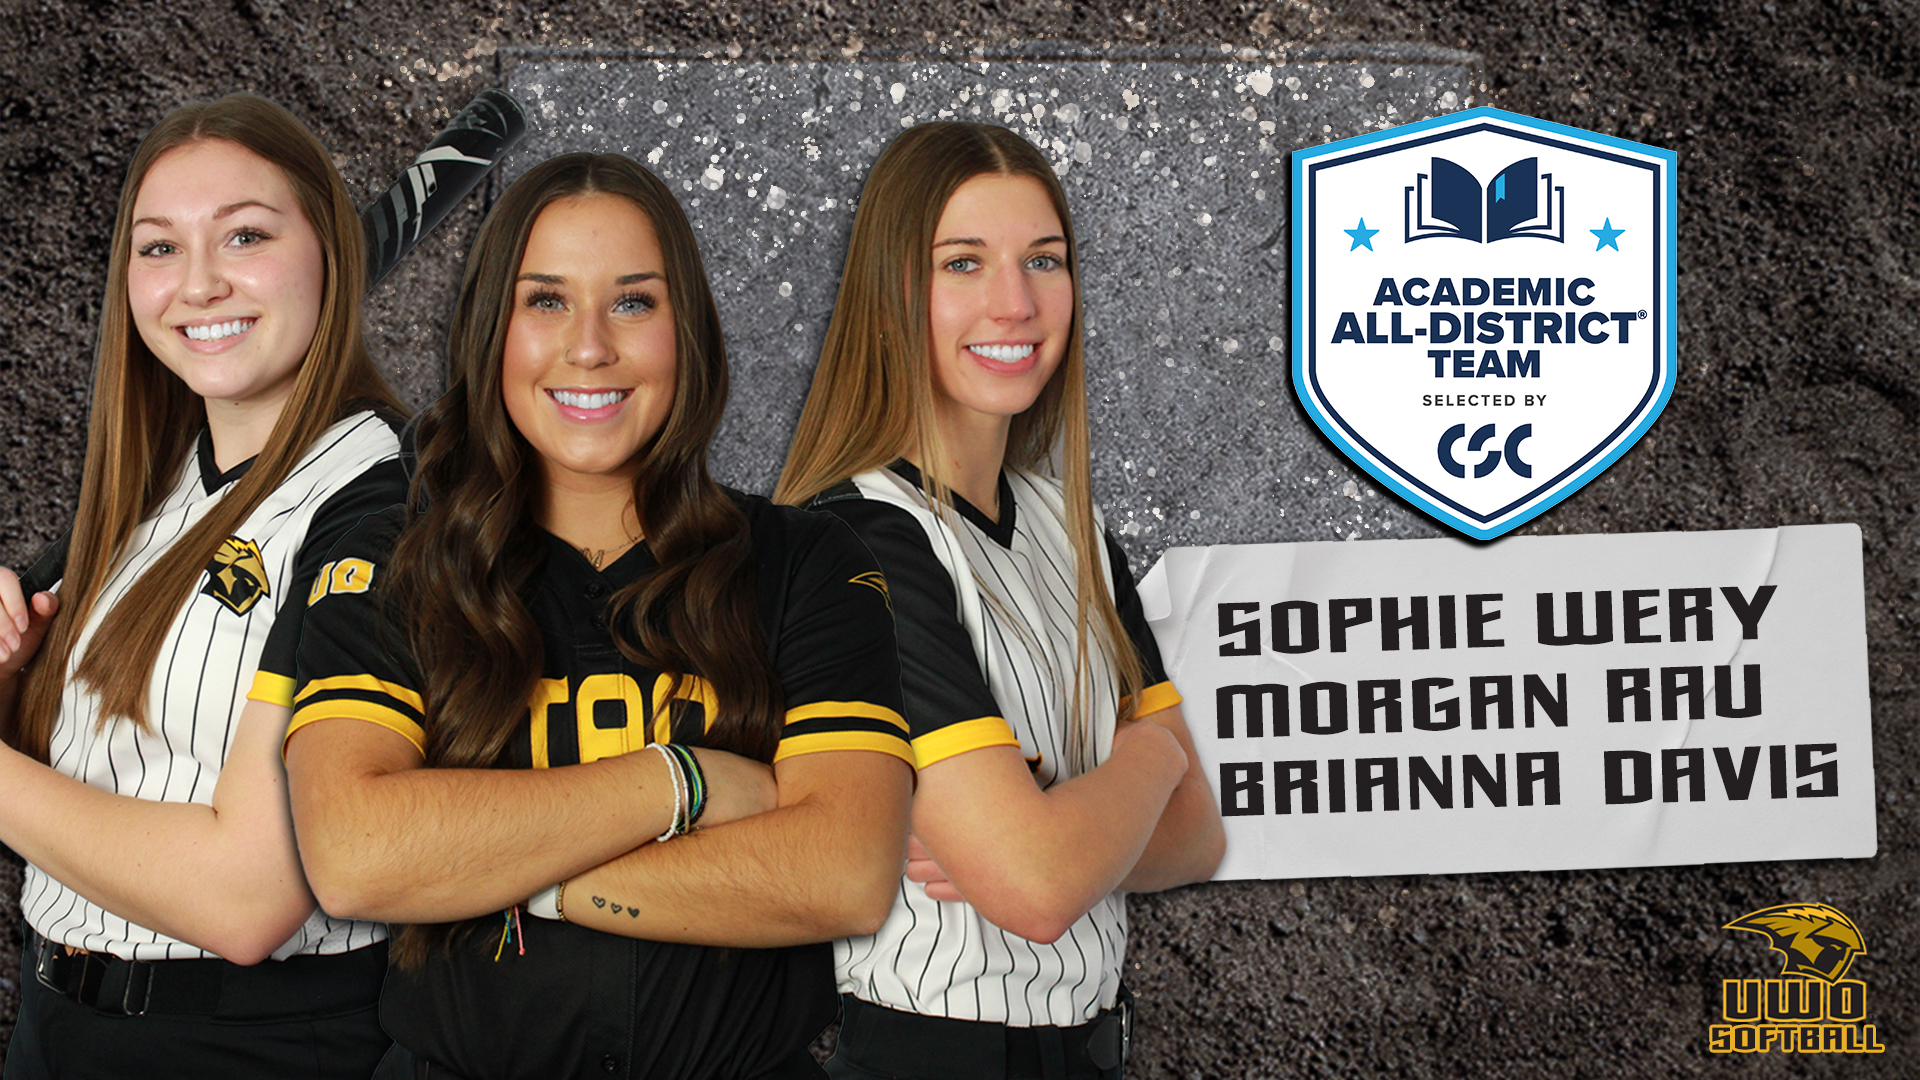 Three Titans Named to CSC Academic All-District